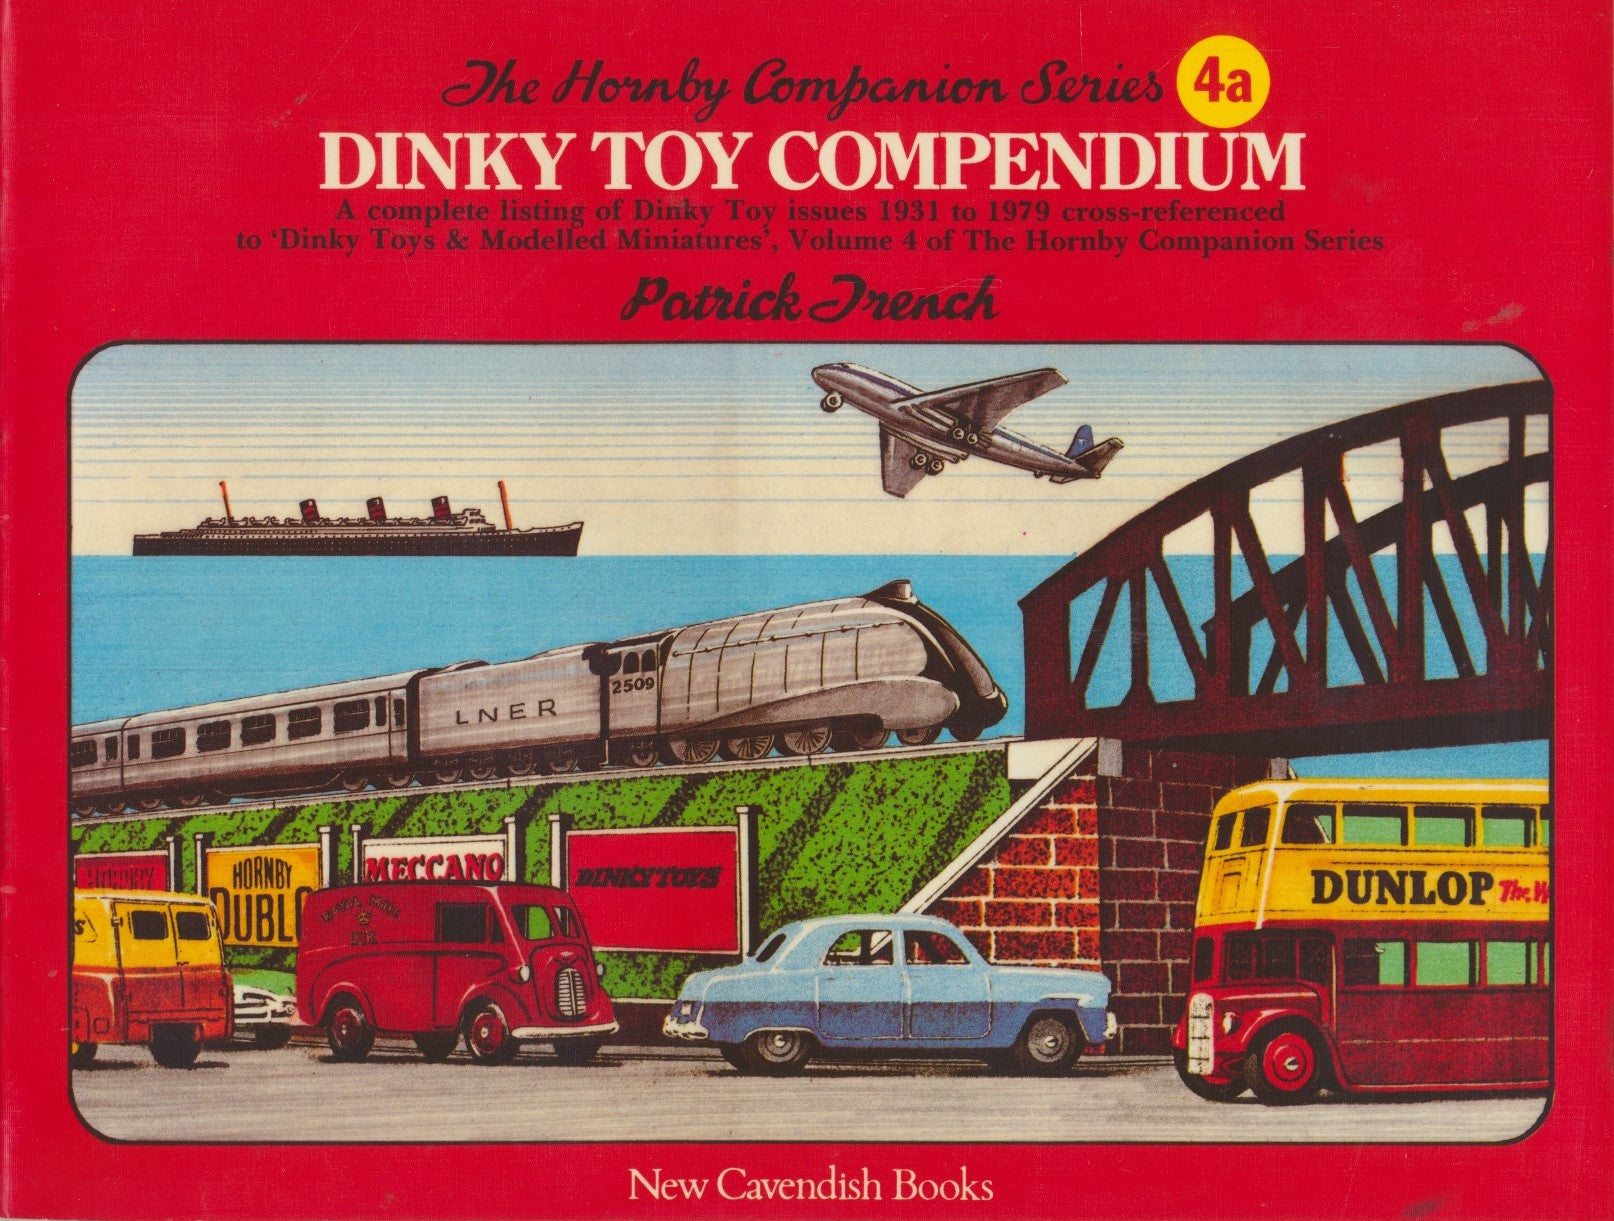 Dinky Toy Compendium: Vol 4a (Hornby Companion Series)